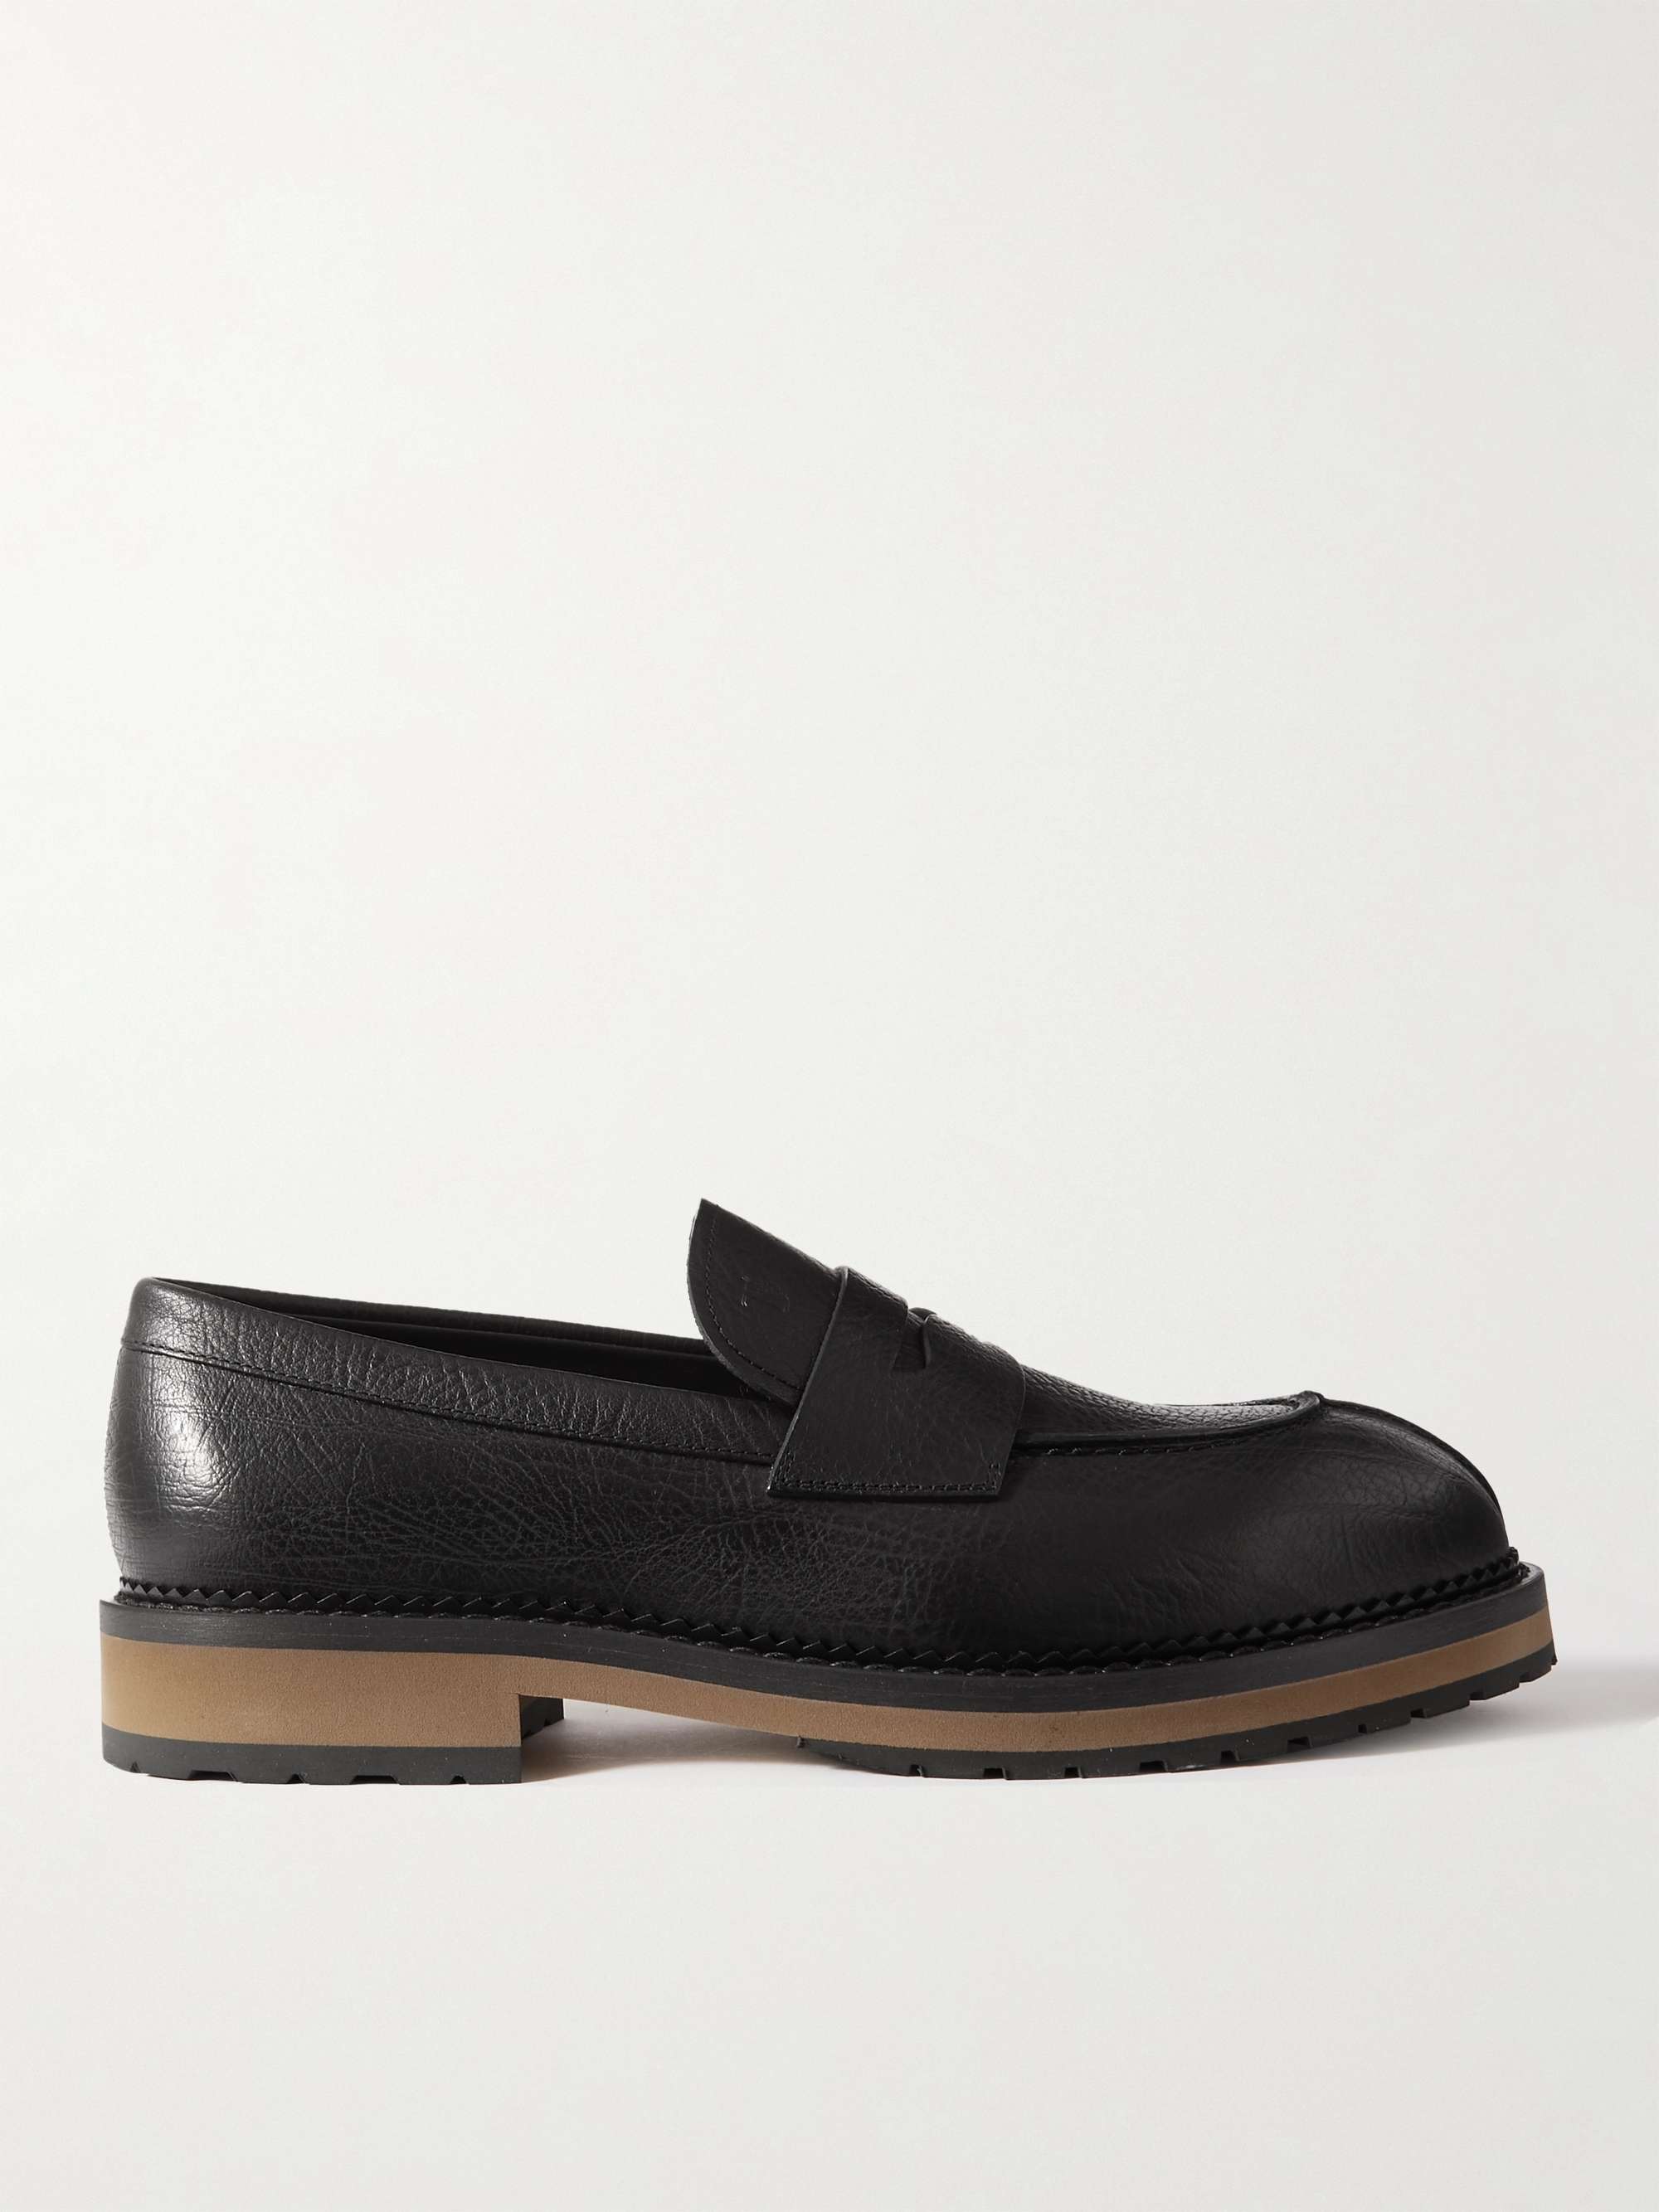 TOD'S Full-Grain Leather Penny Loafers